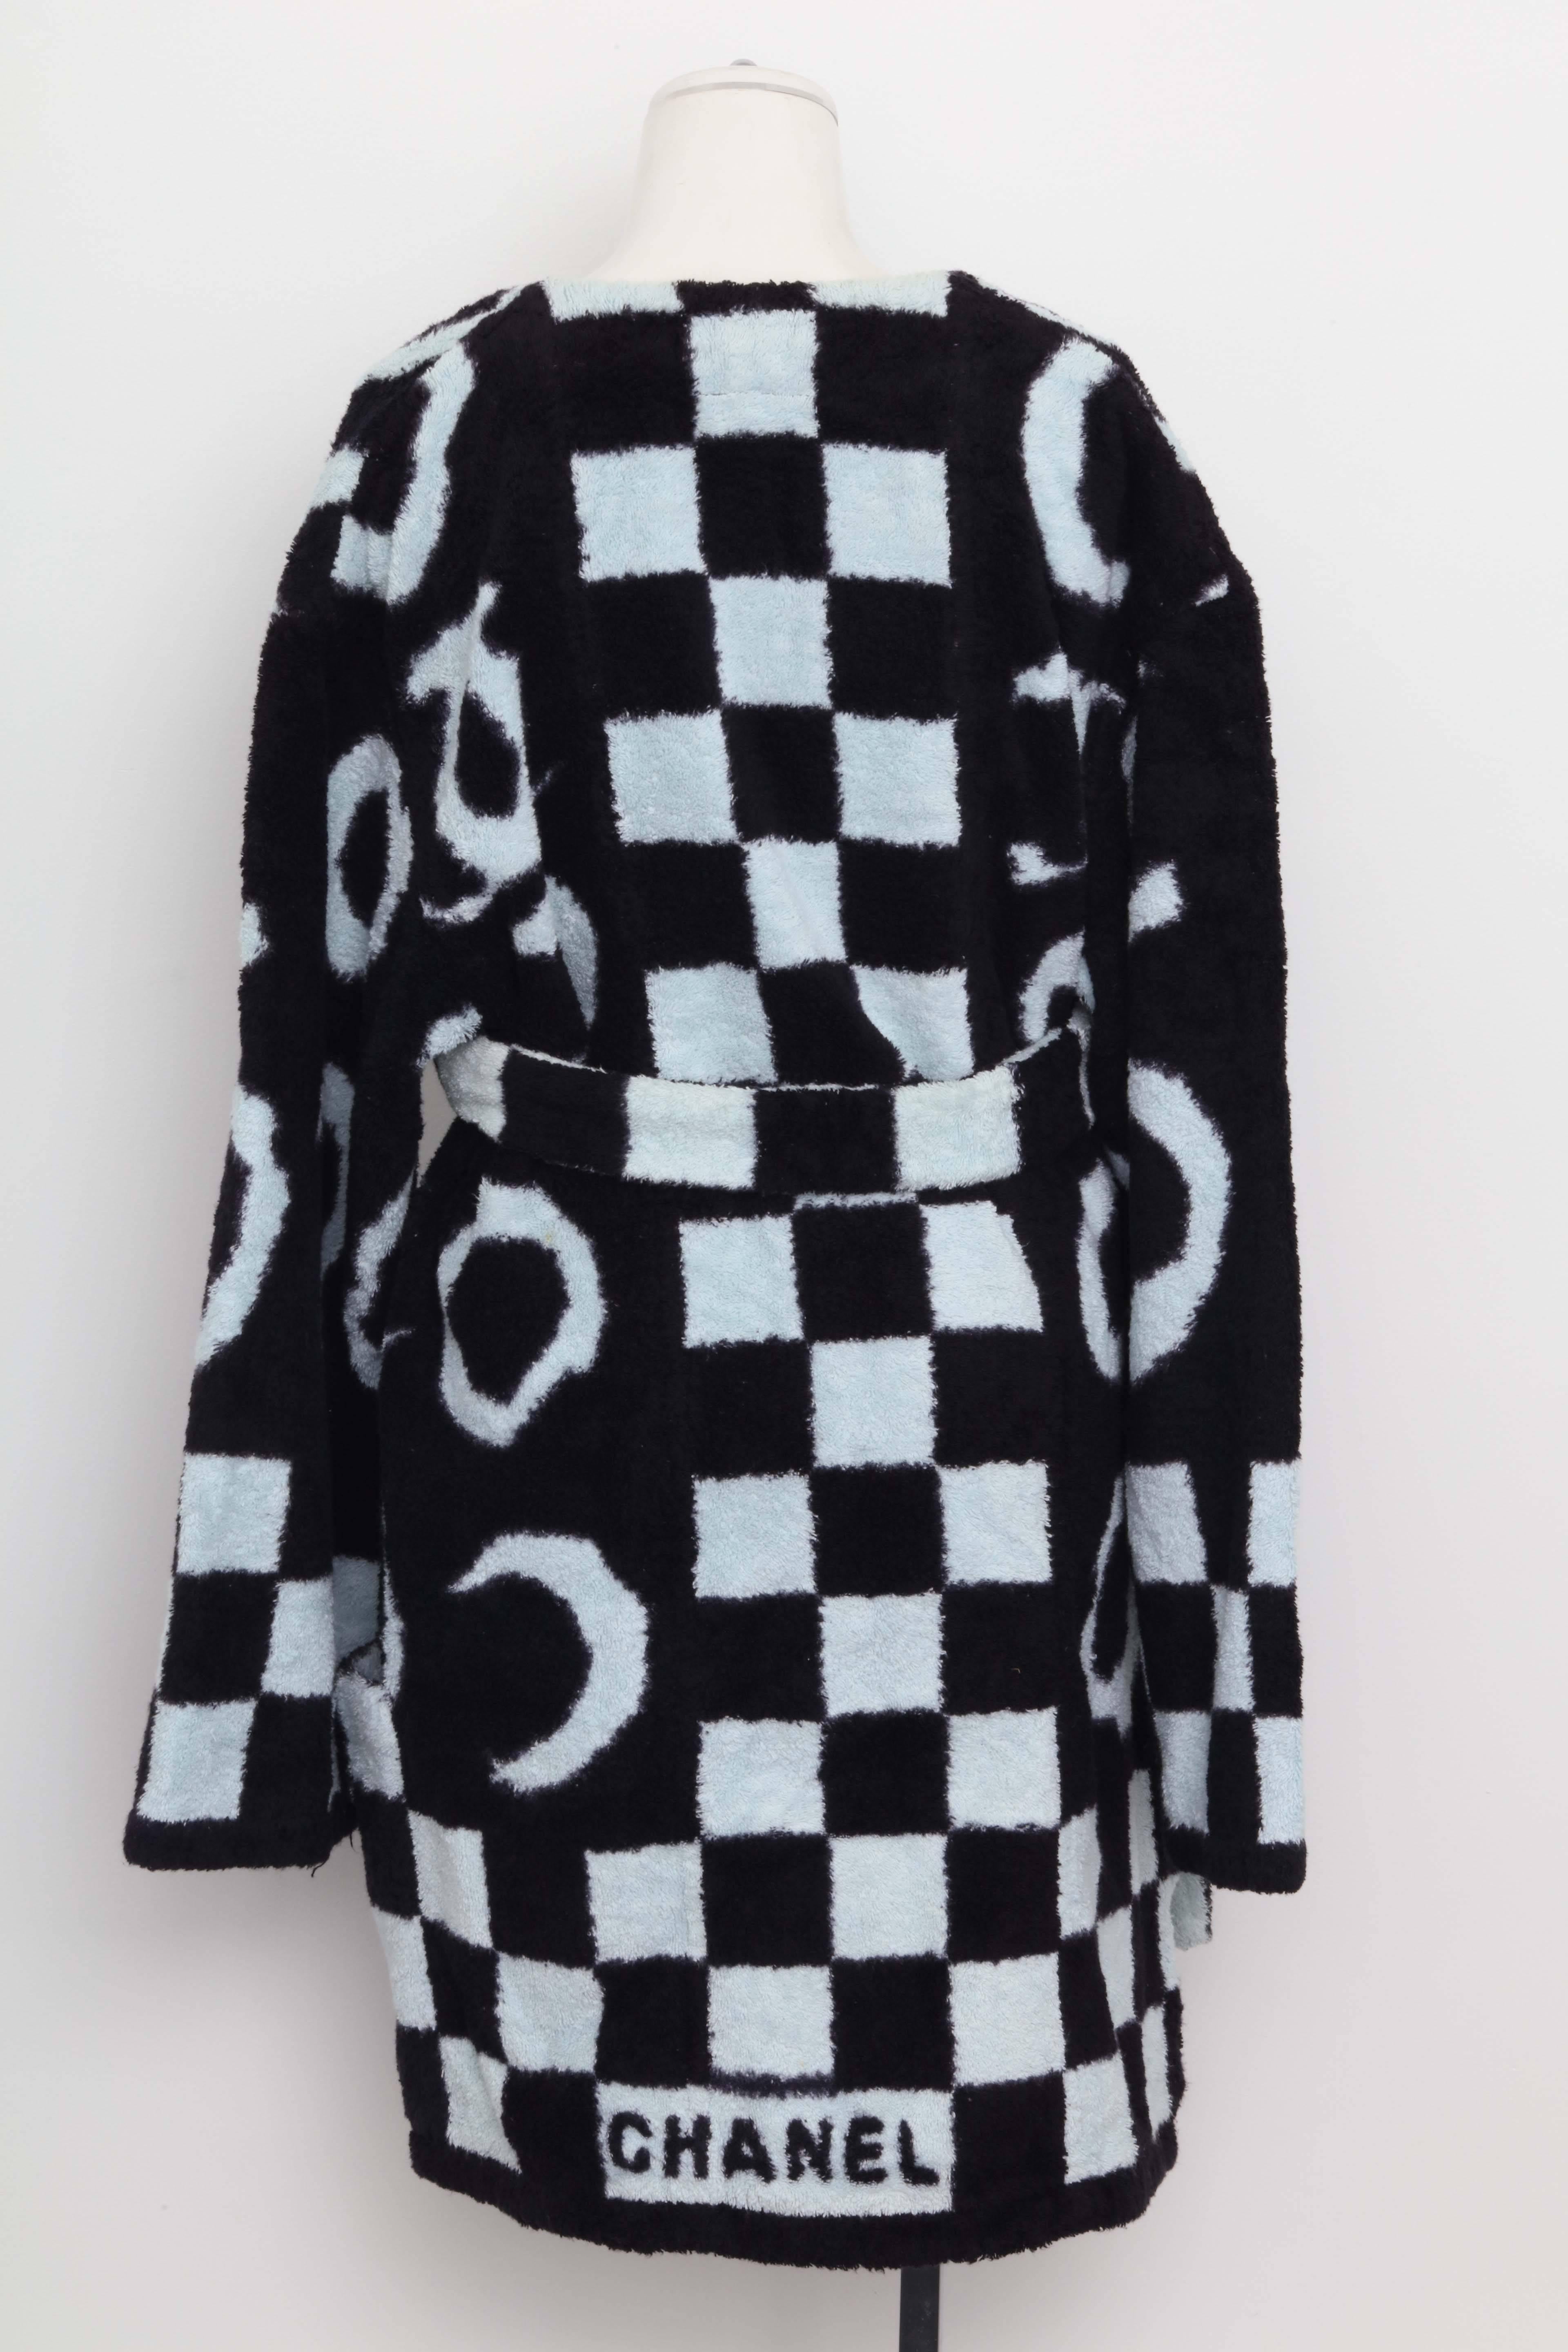 Very Rare Chanel Terry Bath Robe with Iconic CC 1